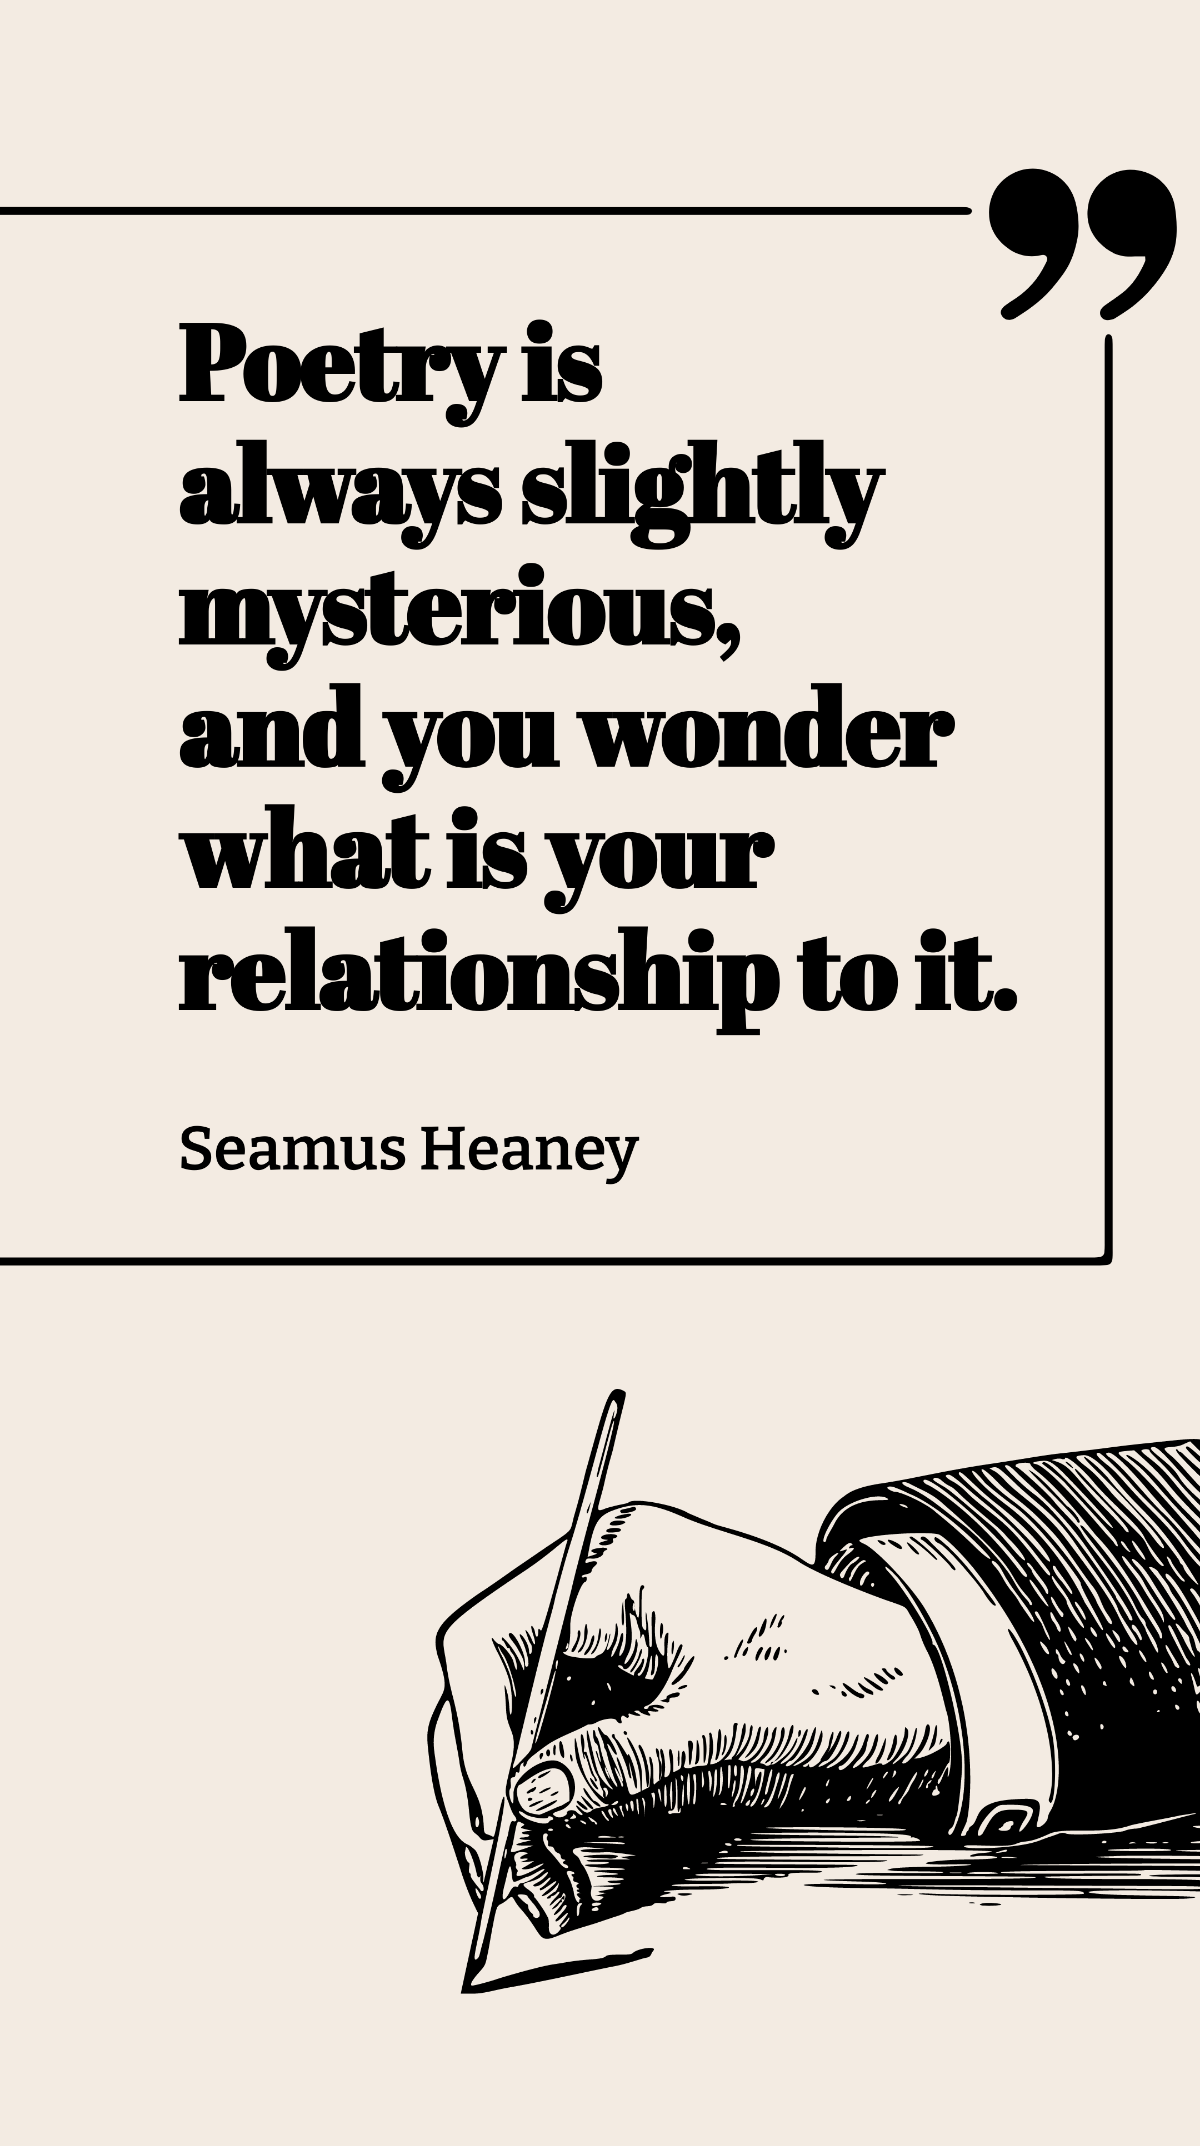 Seamus Heaney - Poetry is always slightly mysterious, and you wonder what is your relationship to it. Template